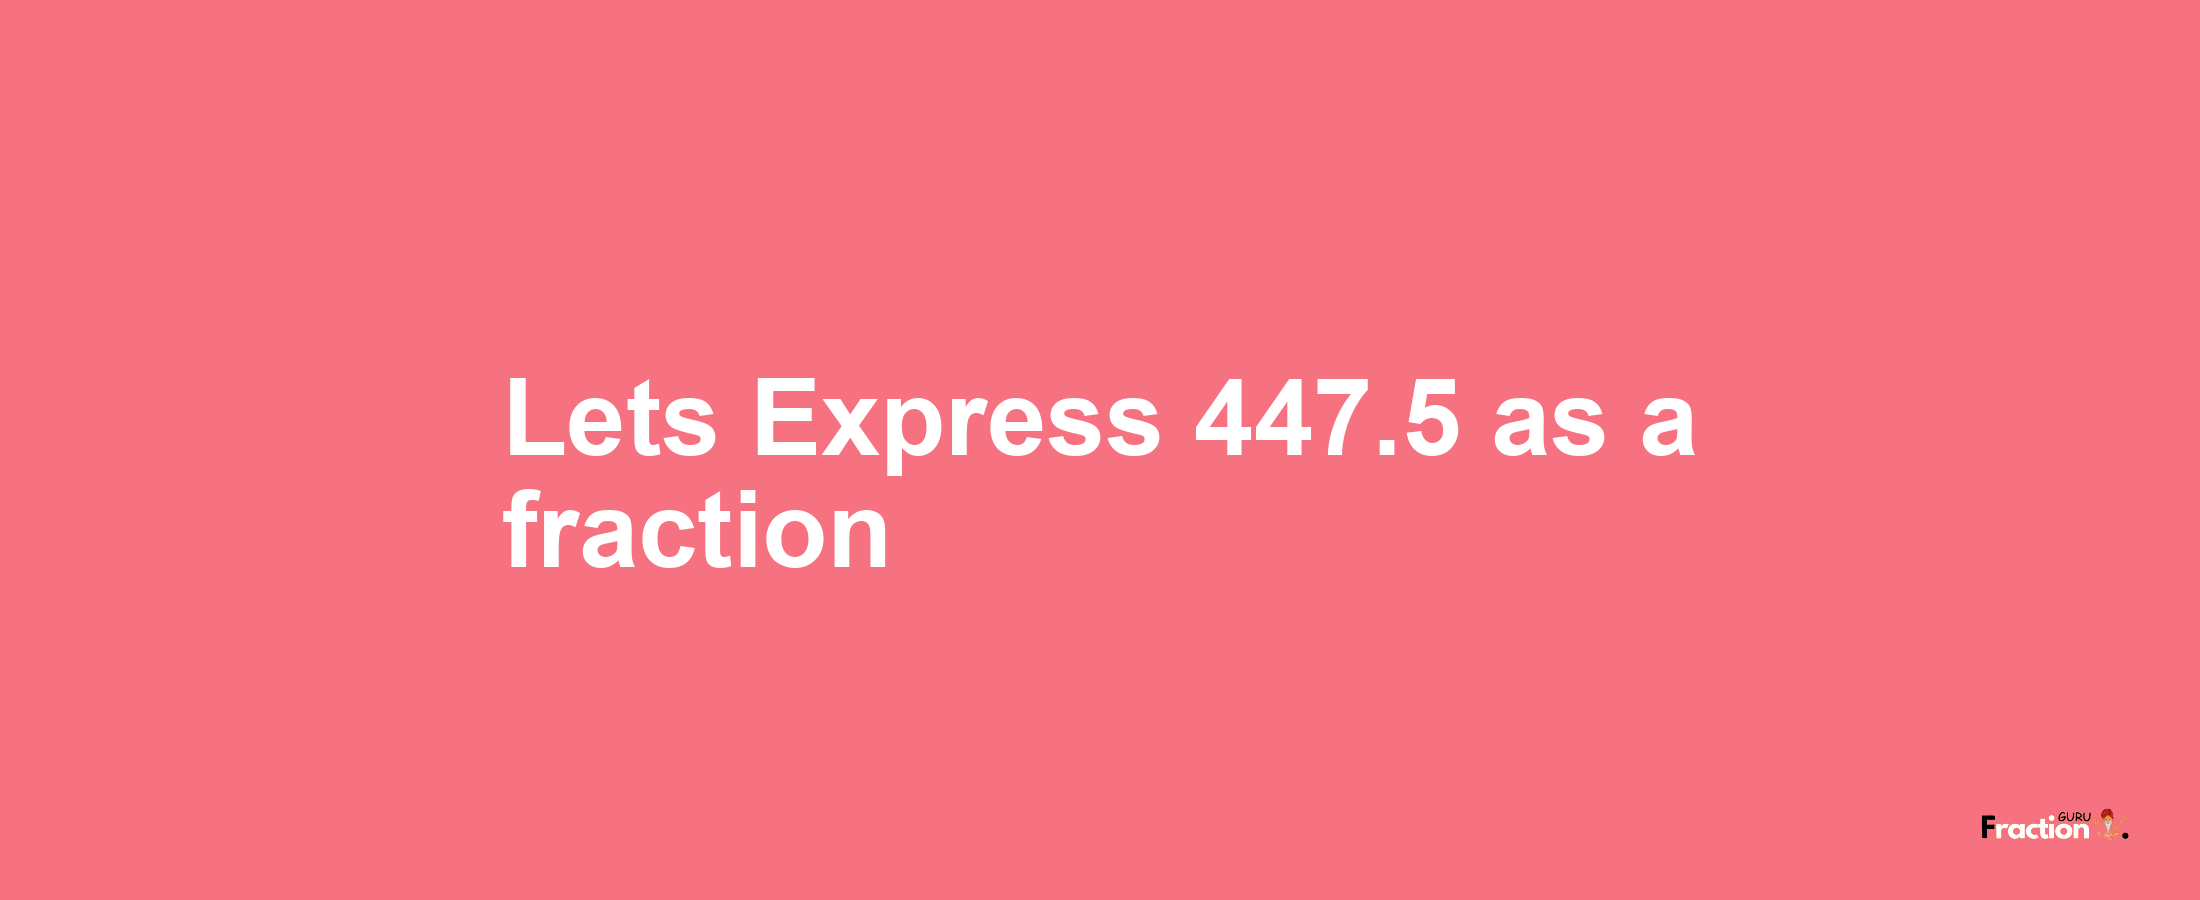 Lets Express 447.5 as afraction